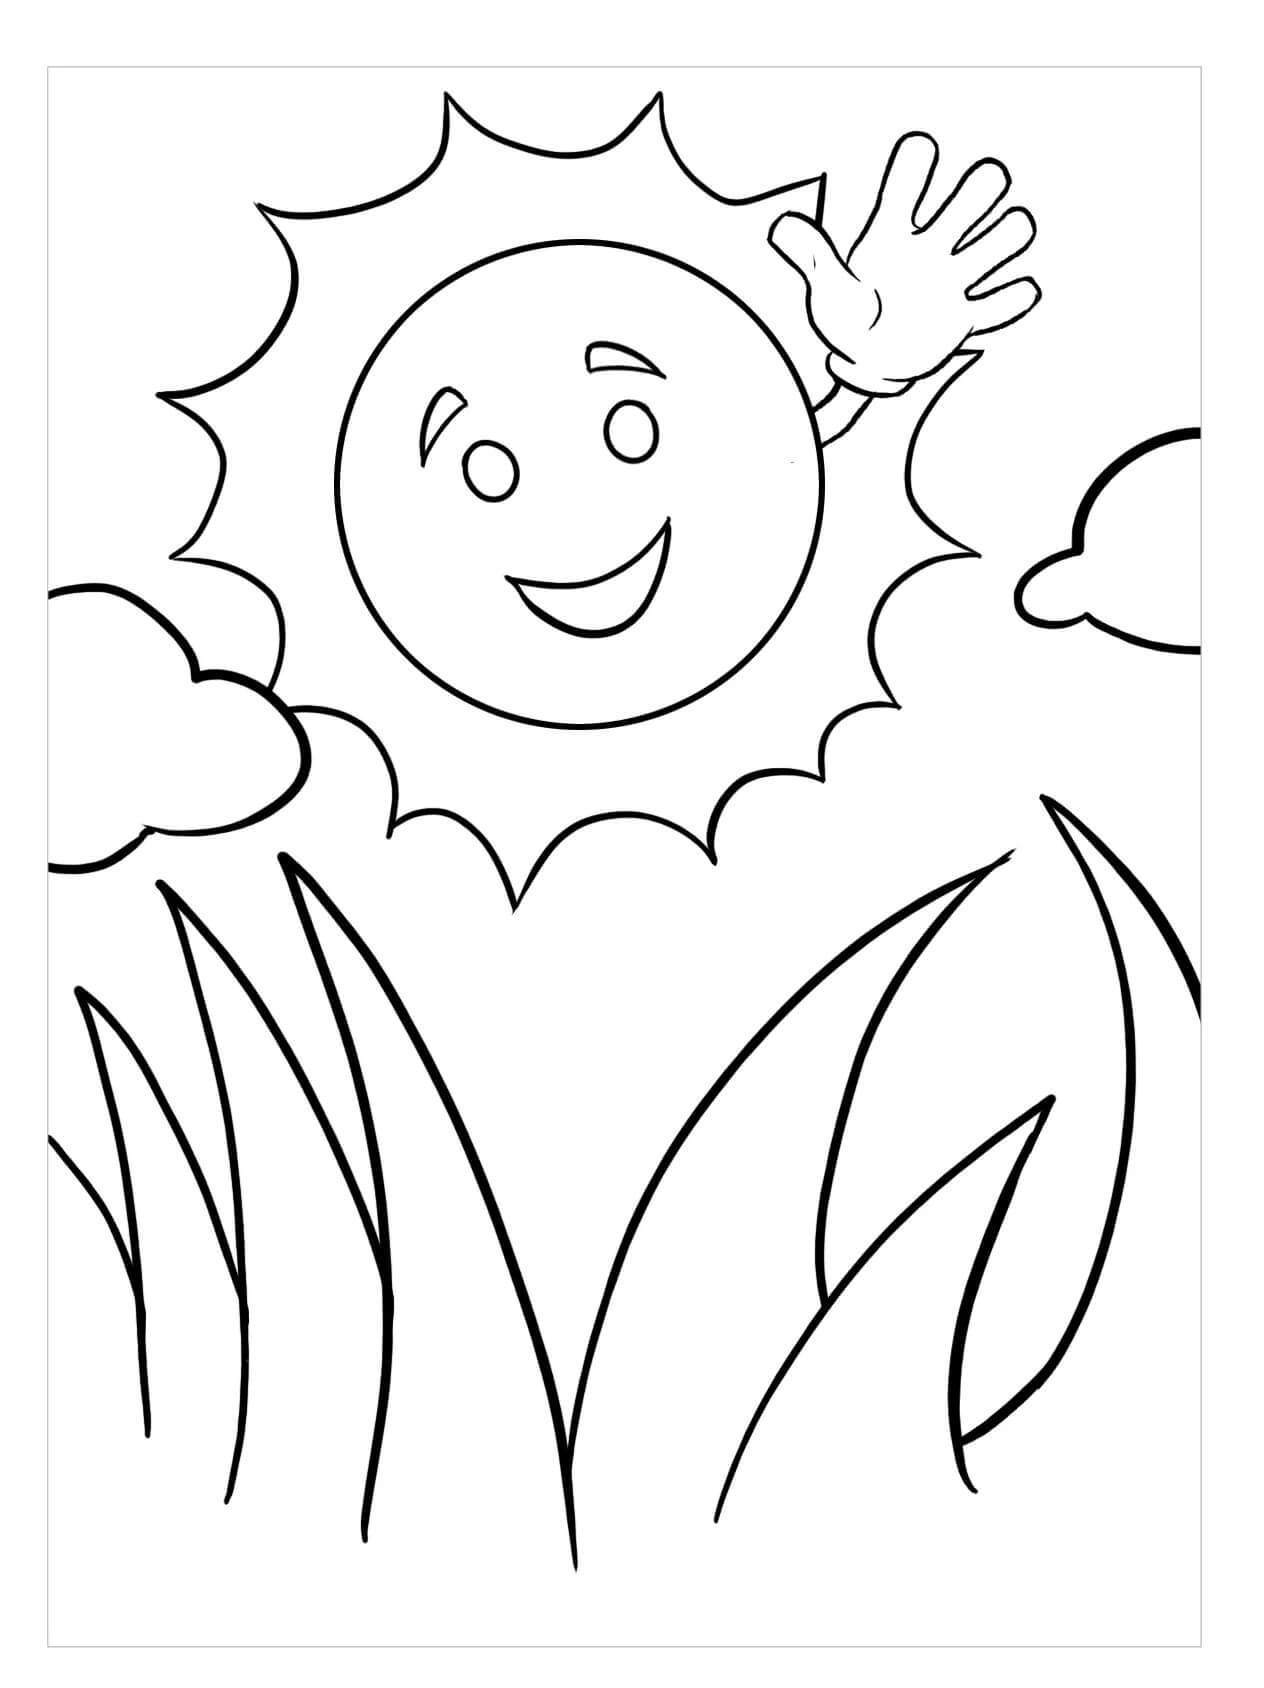 Soleil Amical coloring page